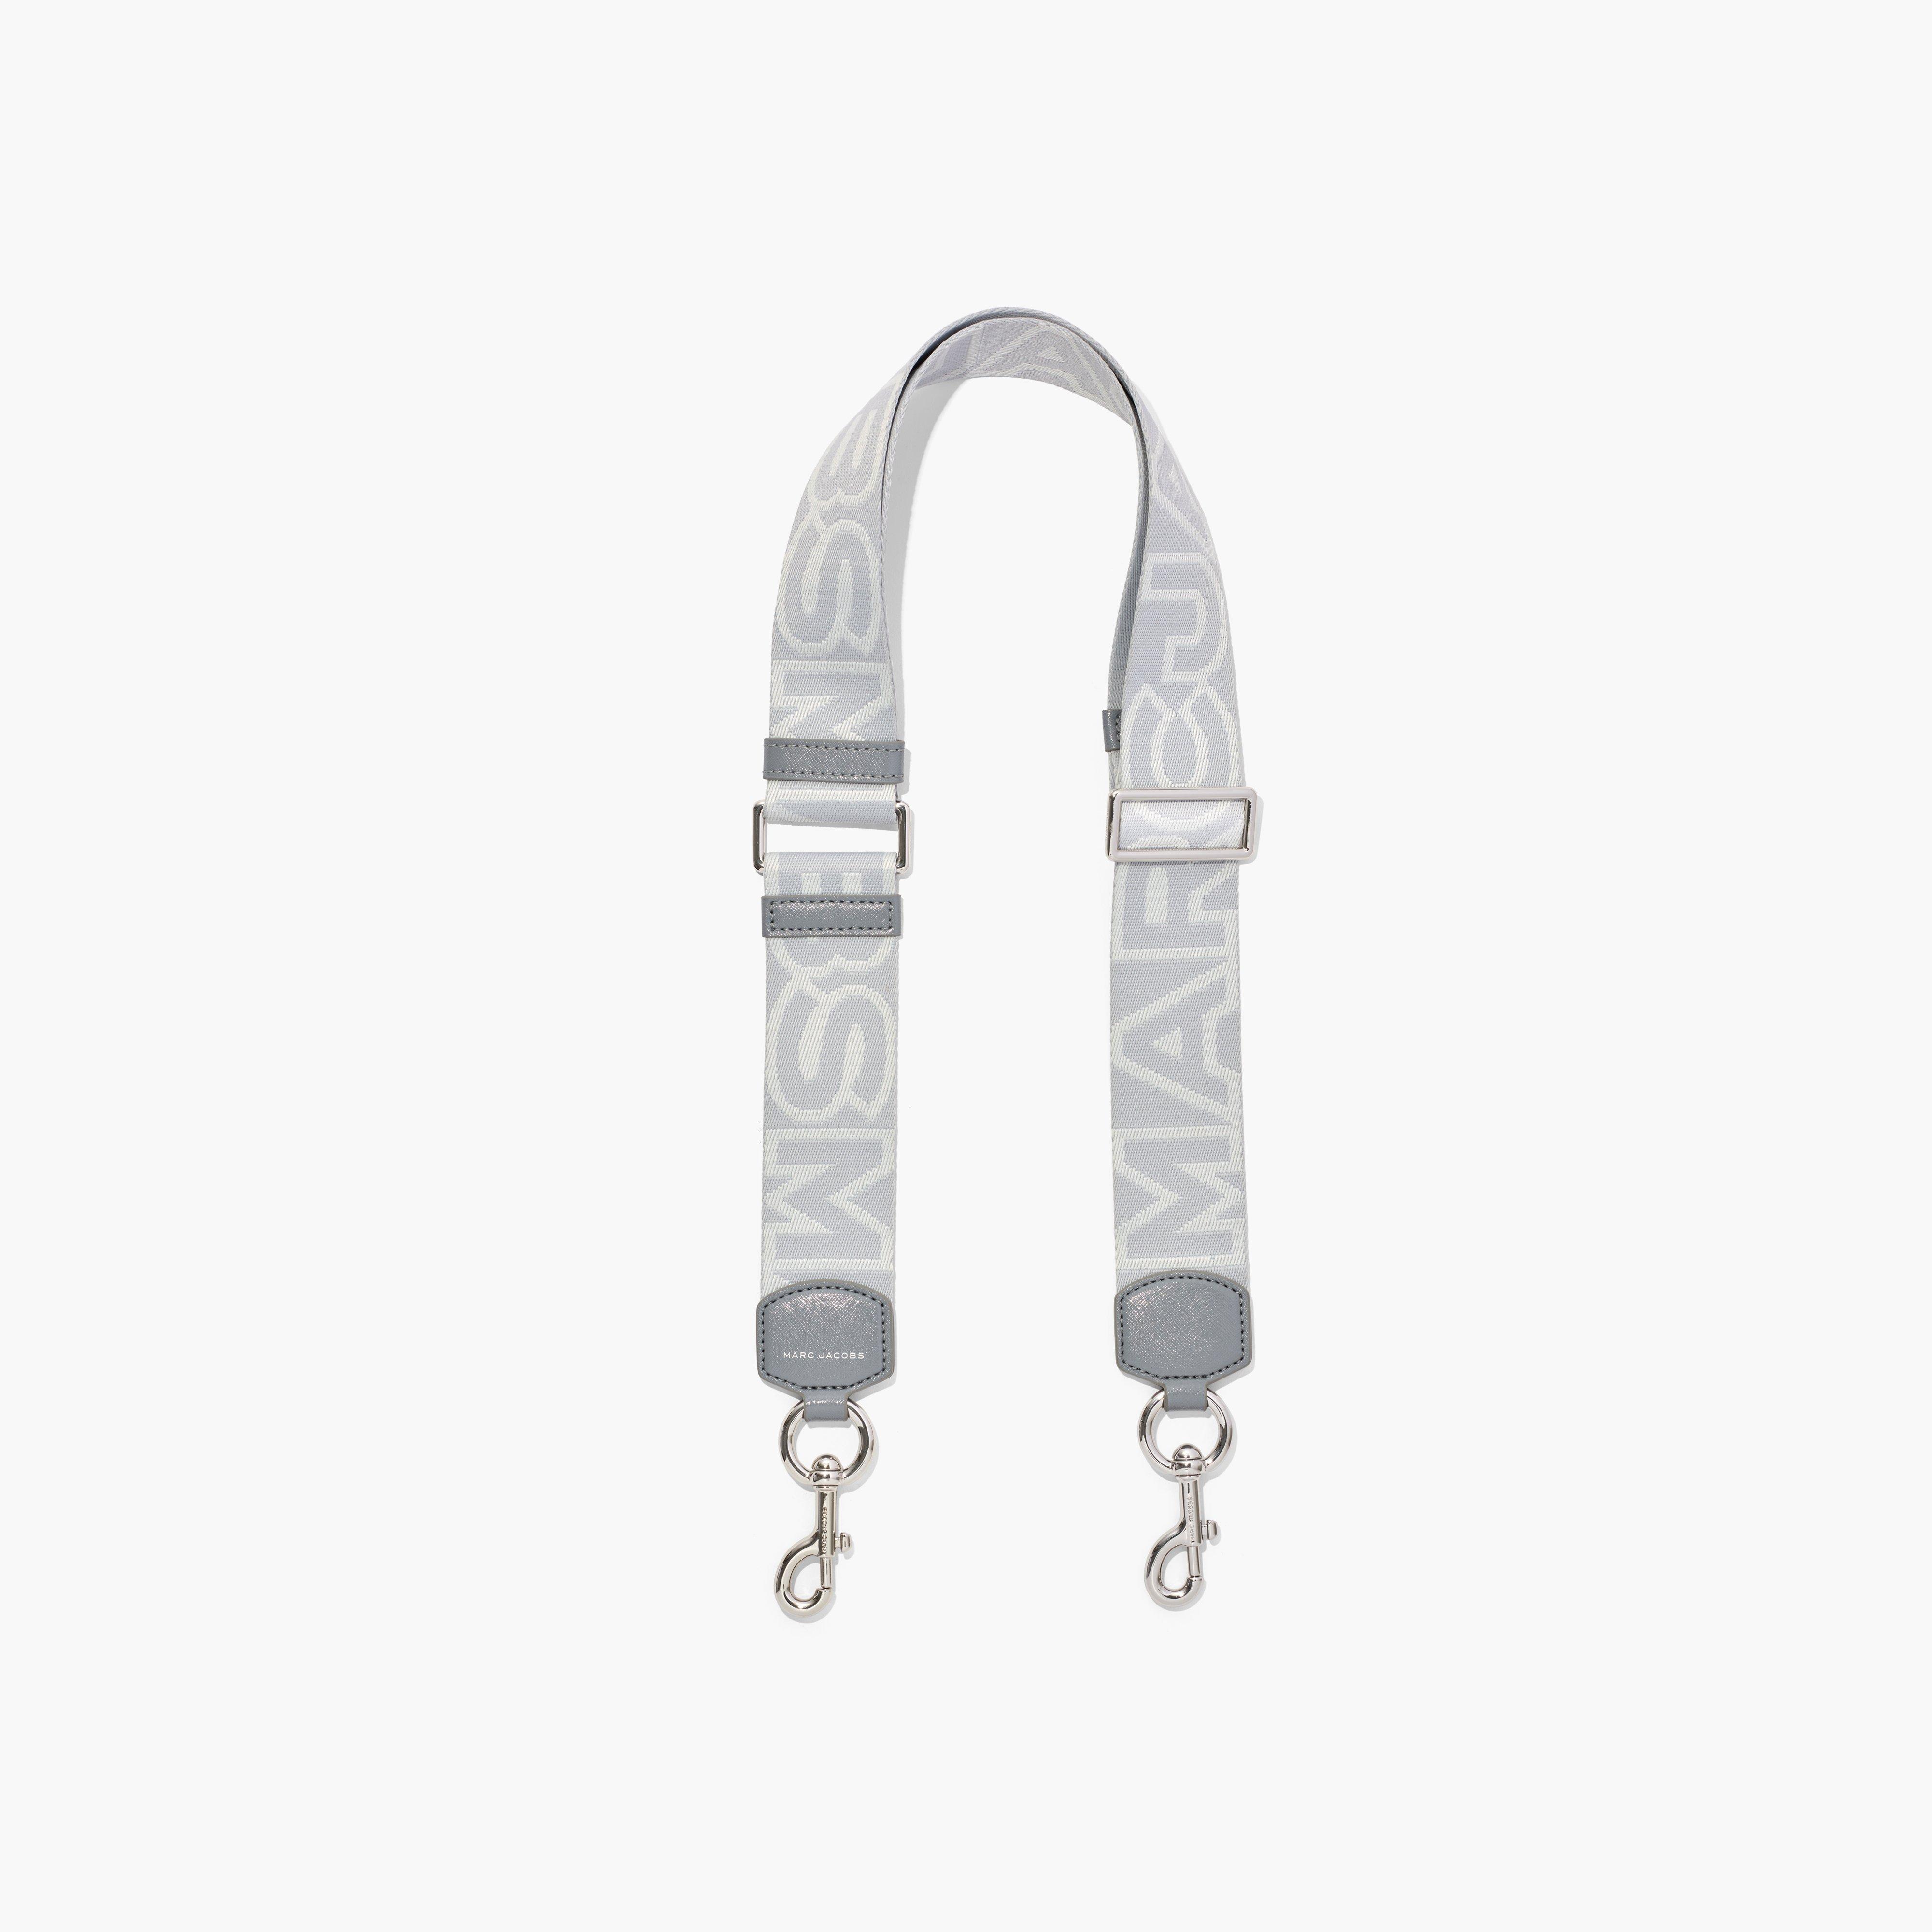 Marc by Marc jacobs The Outline Logo Webbing Strap,WOLF GREY MULTI